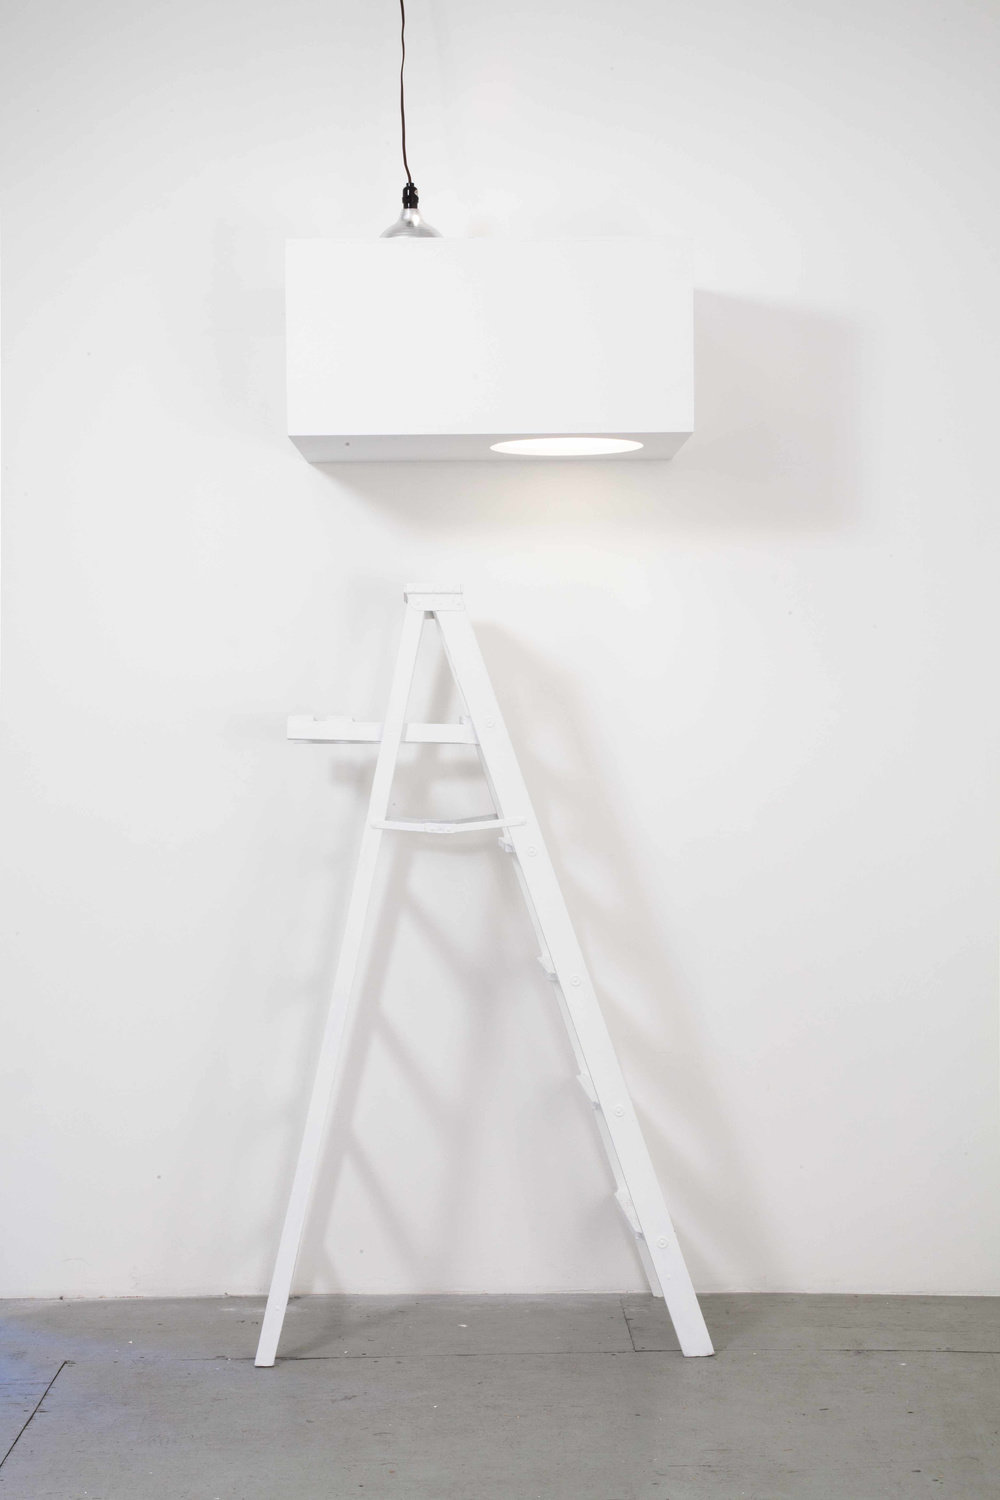 Riepenhoff, the john riepenhoff experience presents   sea horse ecstasy switch by niall macdoanal (from left to right) credit card sea urchin pipe light switch, 2013, wood, ladder, paint and light, 103 x 34 x 18 in. non 54.182